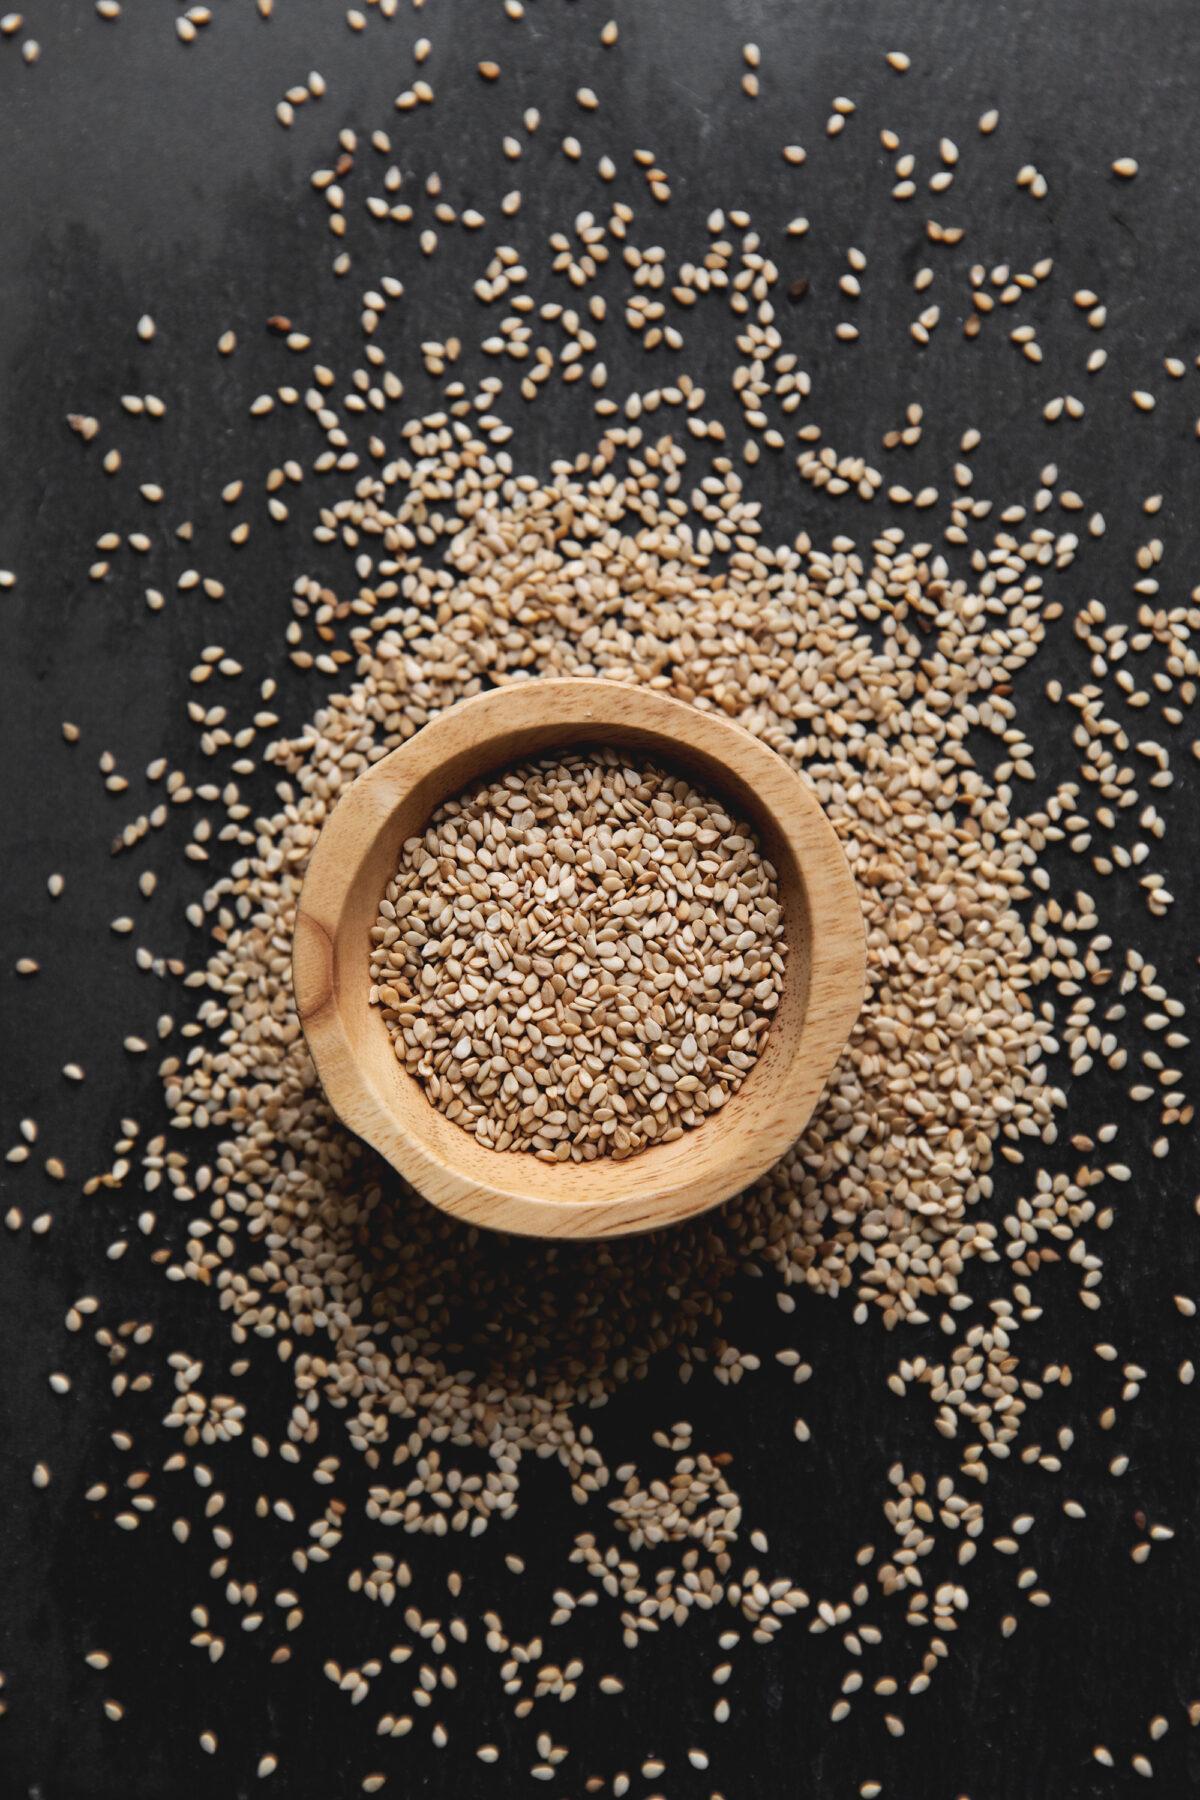 Grown around the town of Humera, in the Tigray region of Ethiopia, buttery, nutty Ethiopian White Humera sesame seeds are the world’s most prized. (Photo copyright Jillian Guyette, courtesy of Agate Publishing)